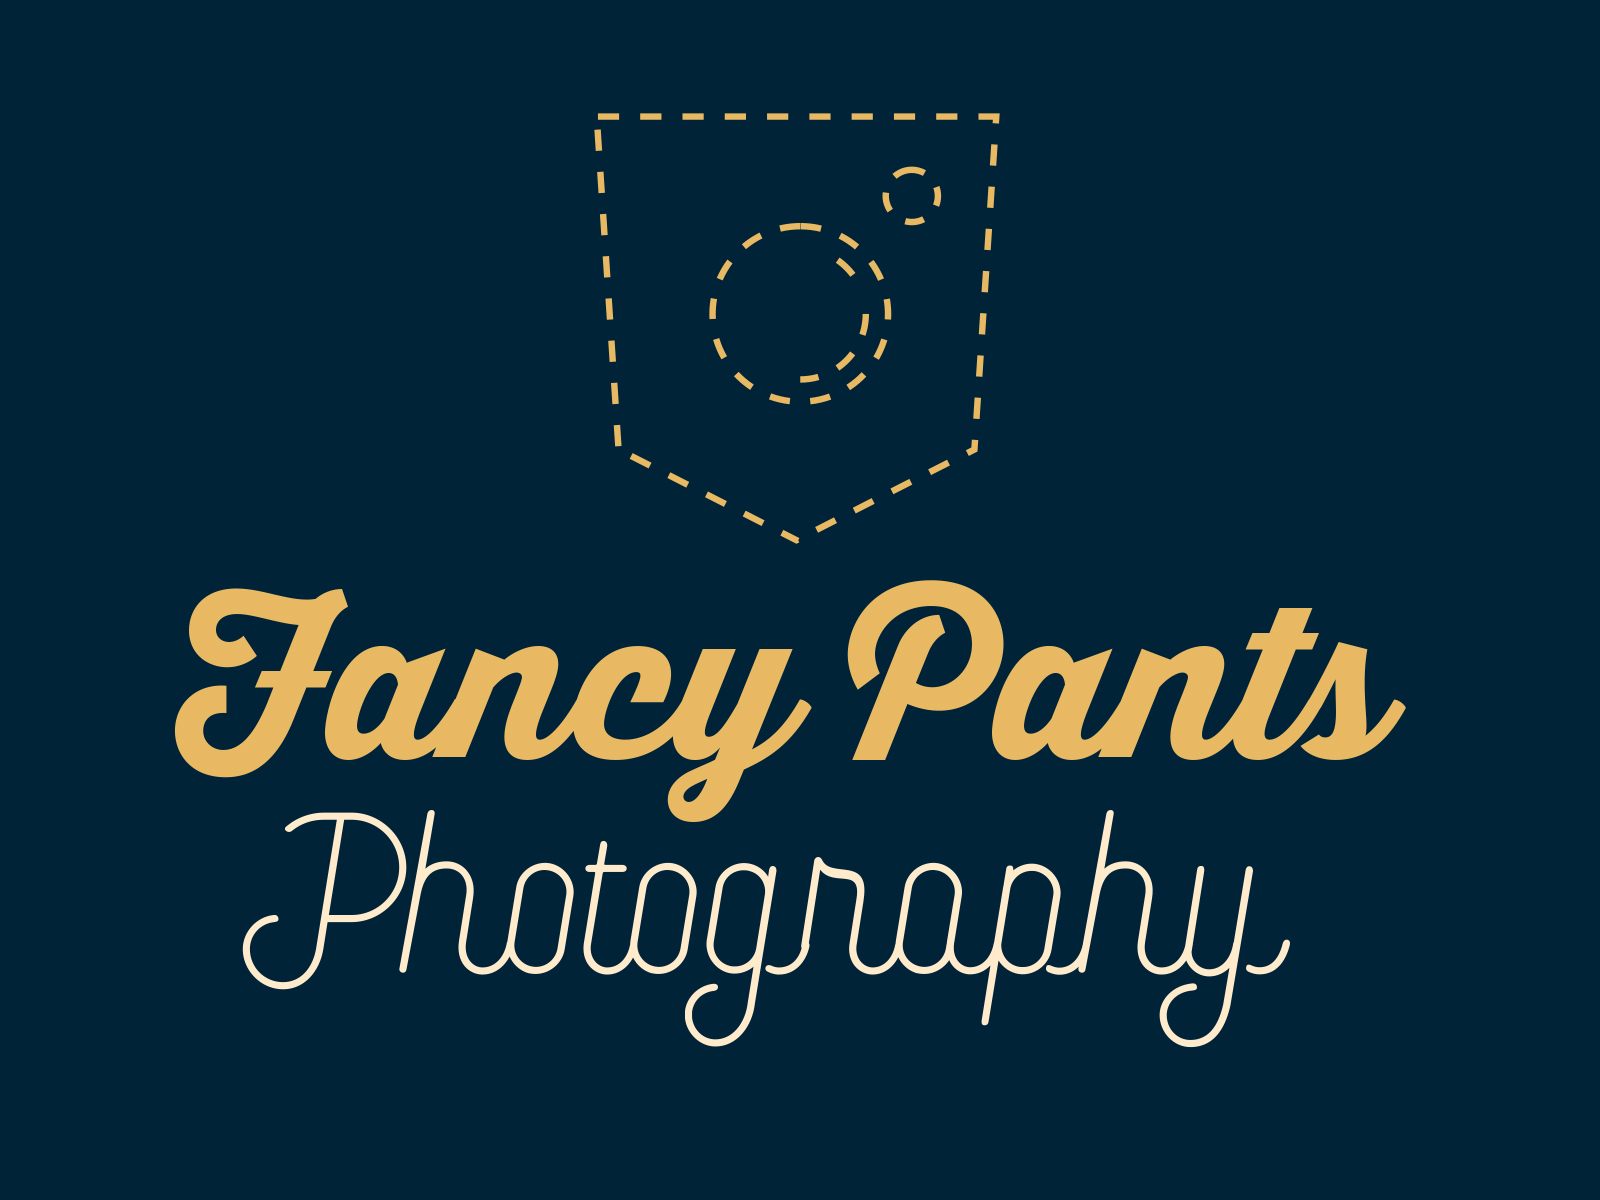 Fancy Pants Photography Logo Design 📸👖 by Dave Finger on Dribbble